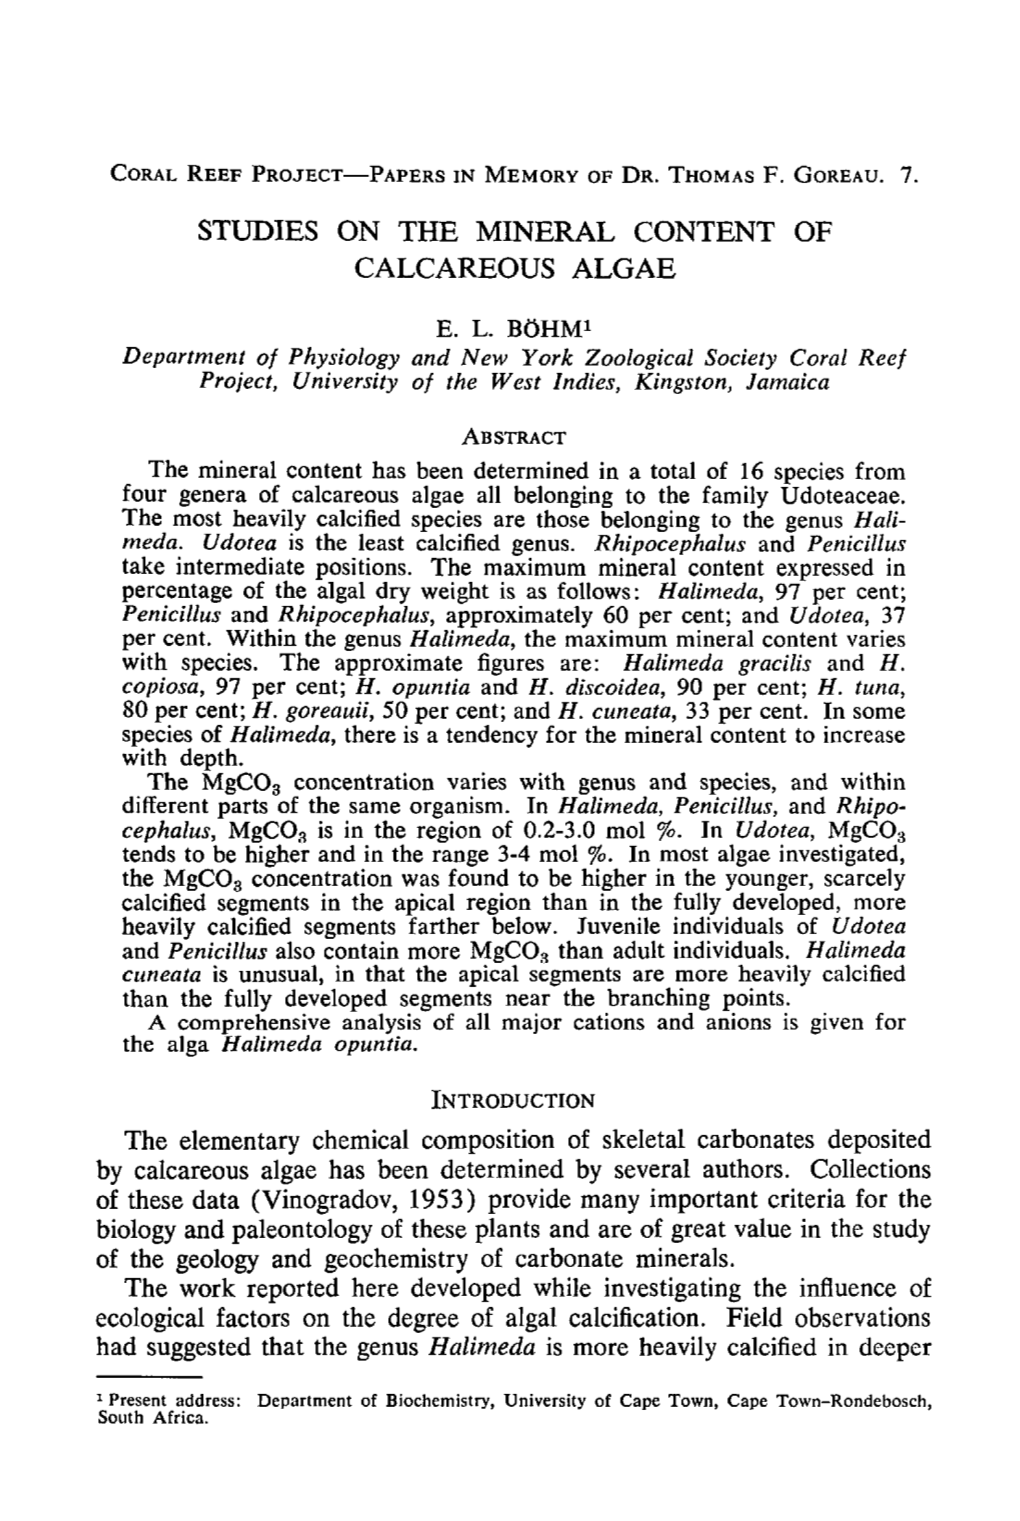 Studies on the Mineral Content of Calcareous Algae